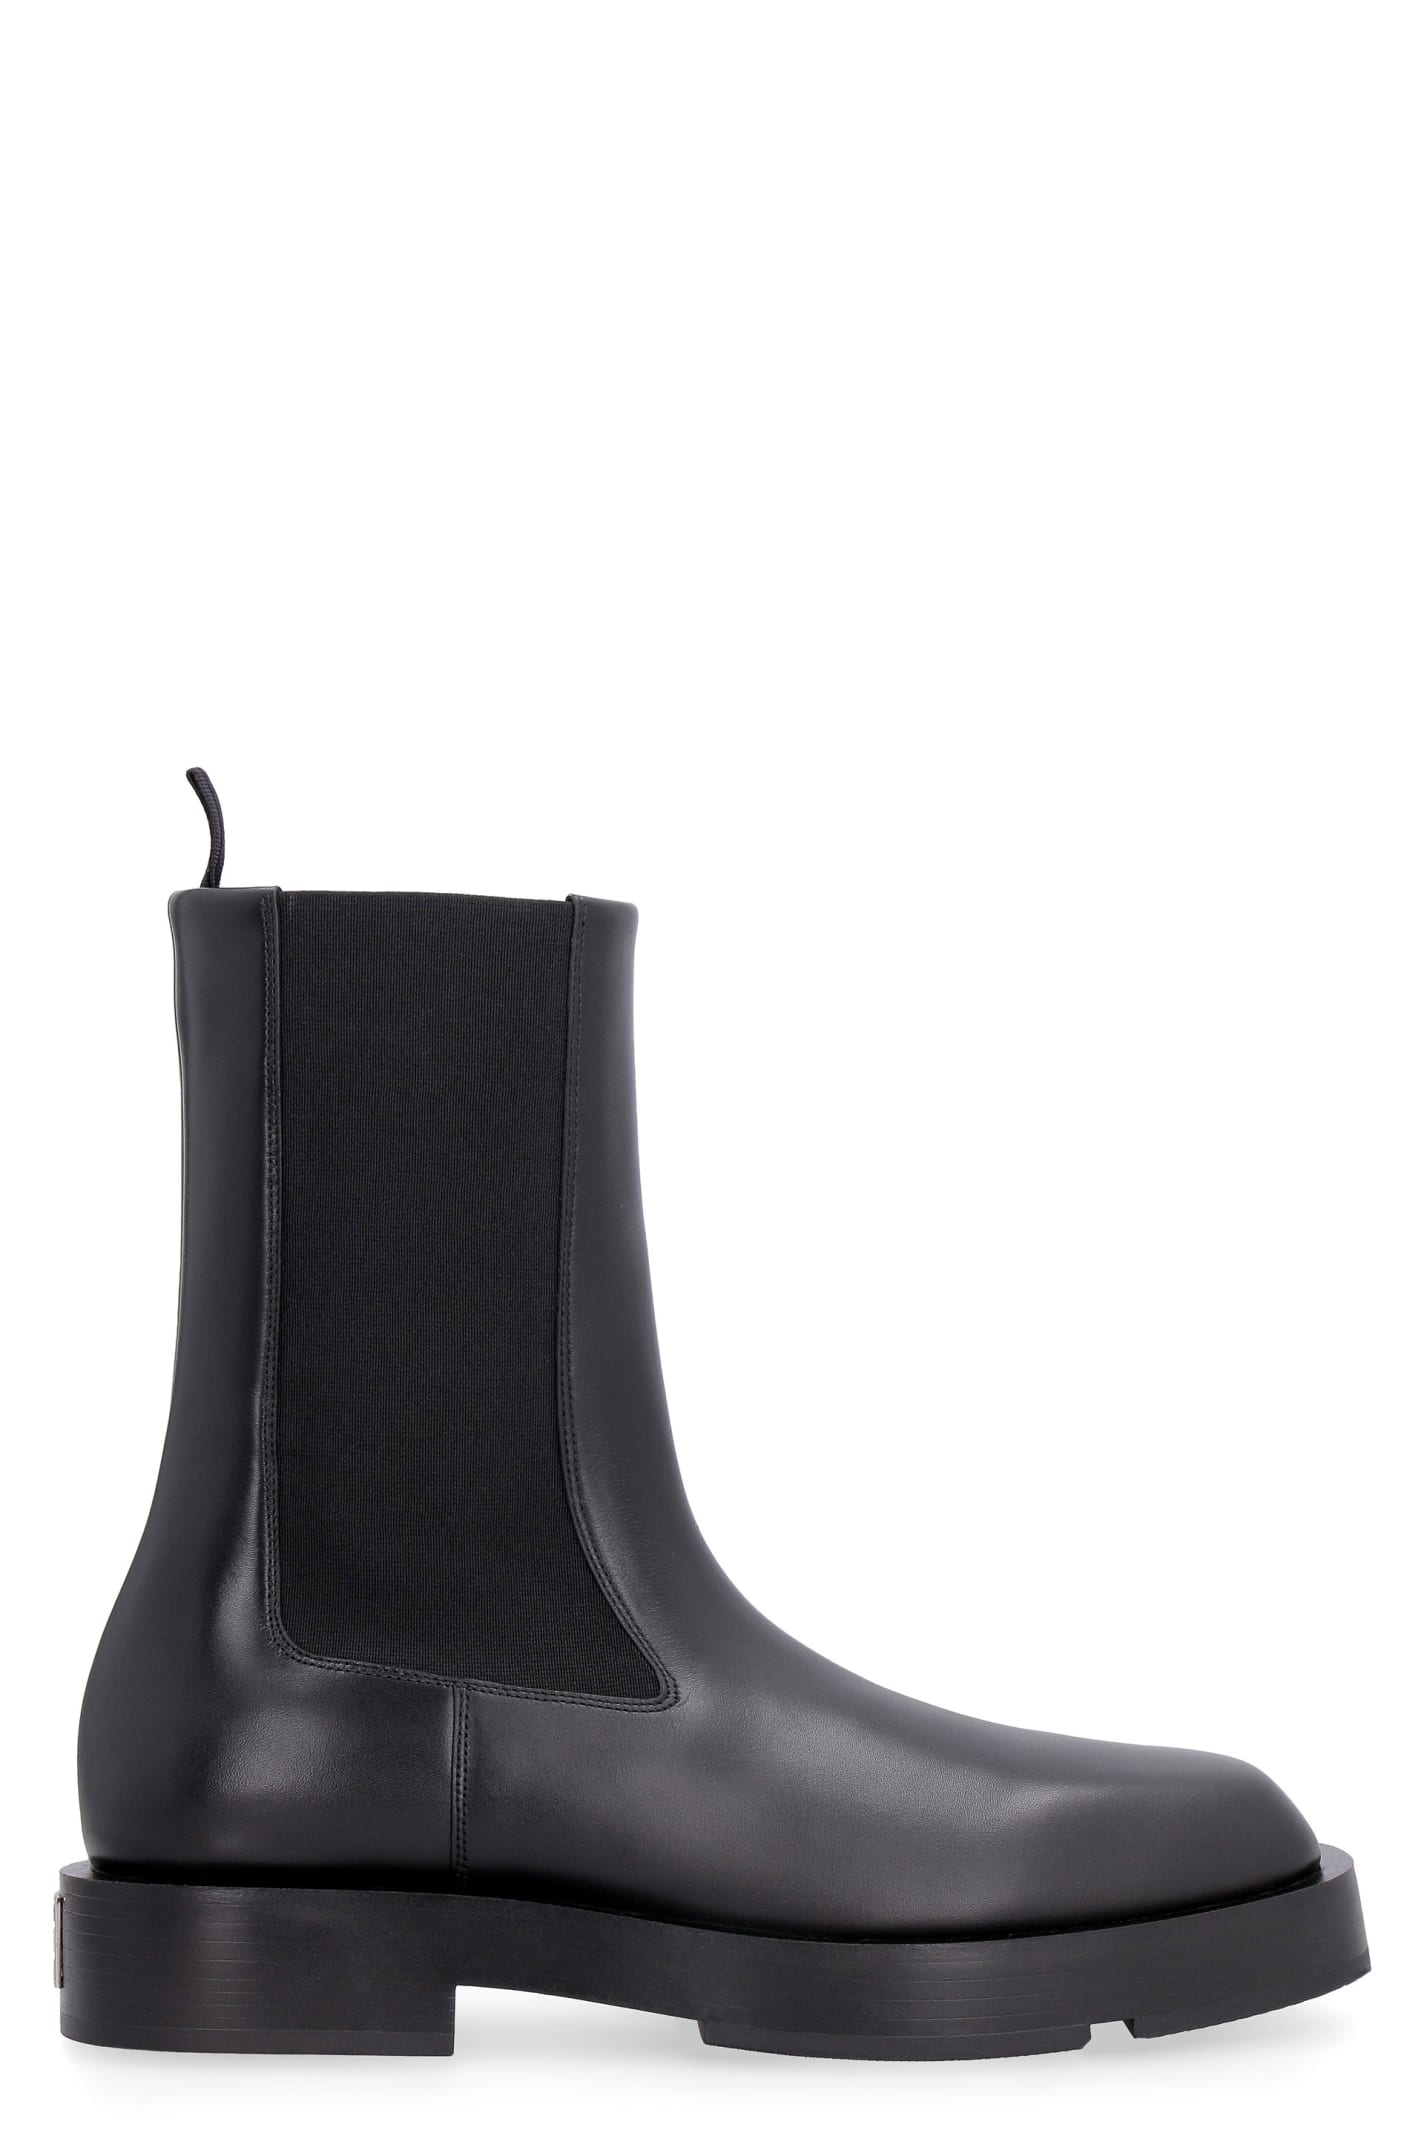 Givenchy Leather Chelsea Boots